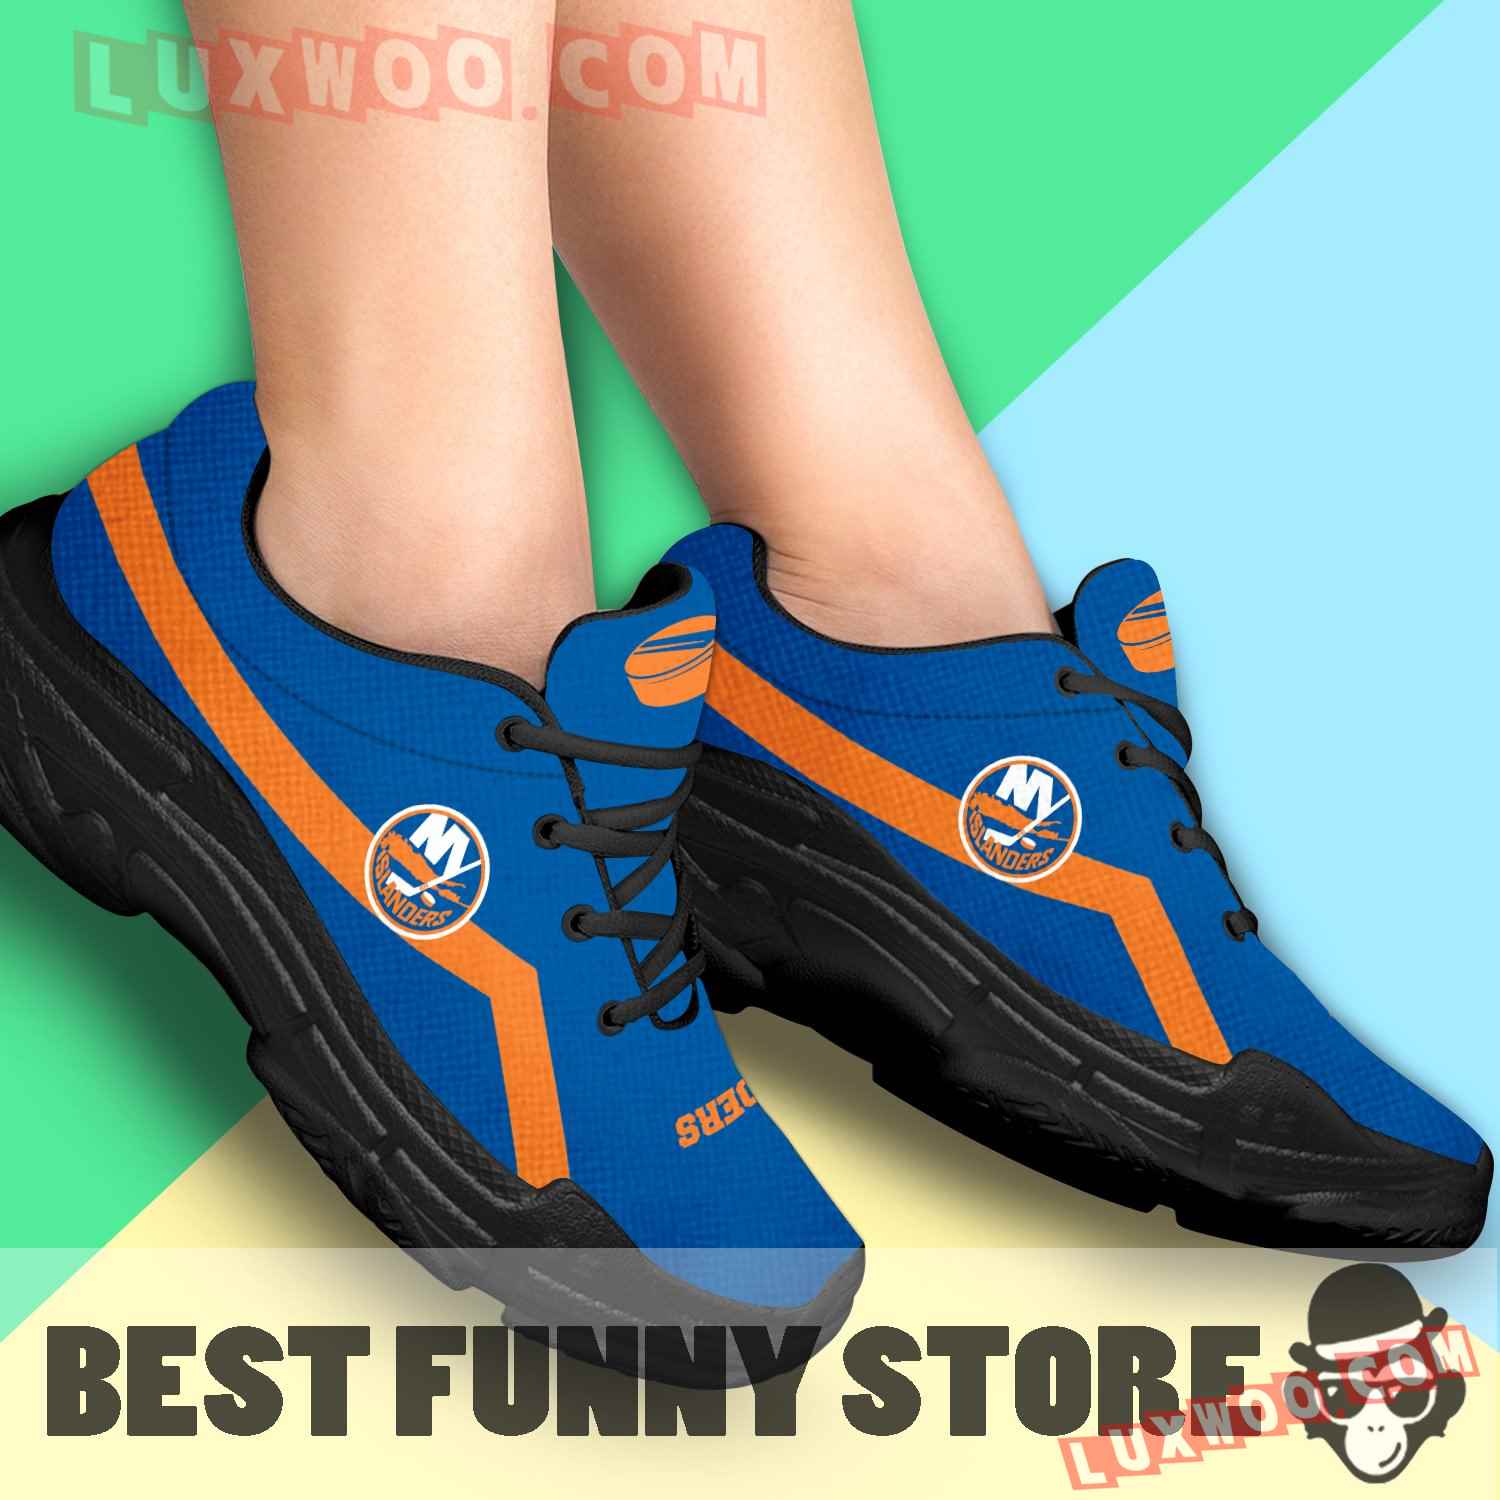 Edition Chunky Sneakers With Line New York Islanders Shoes - Luxwoo.com